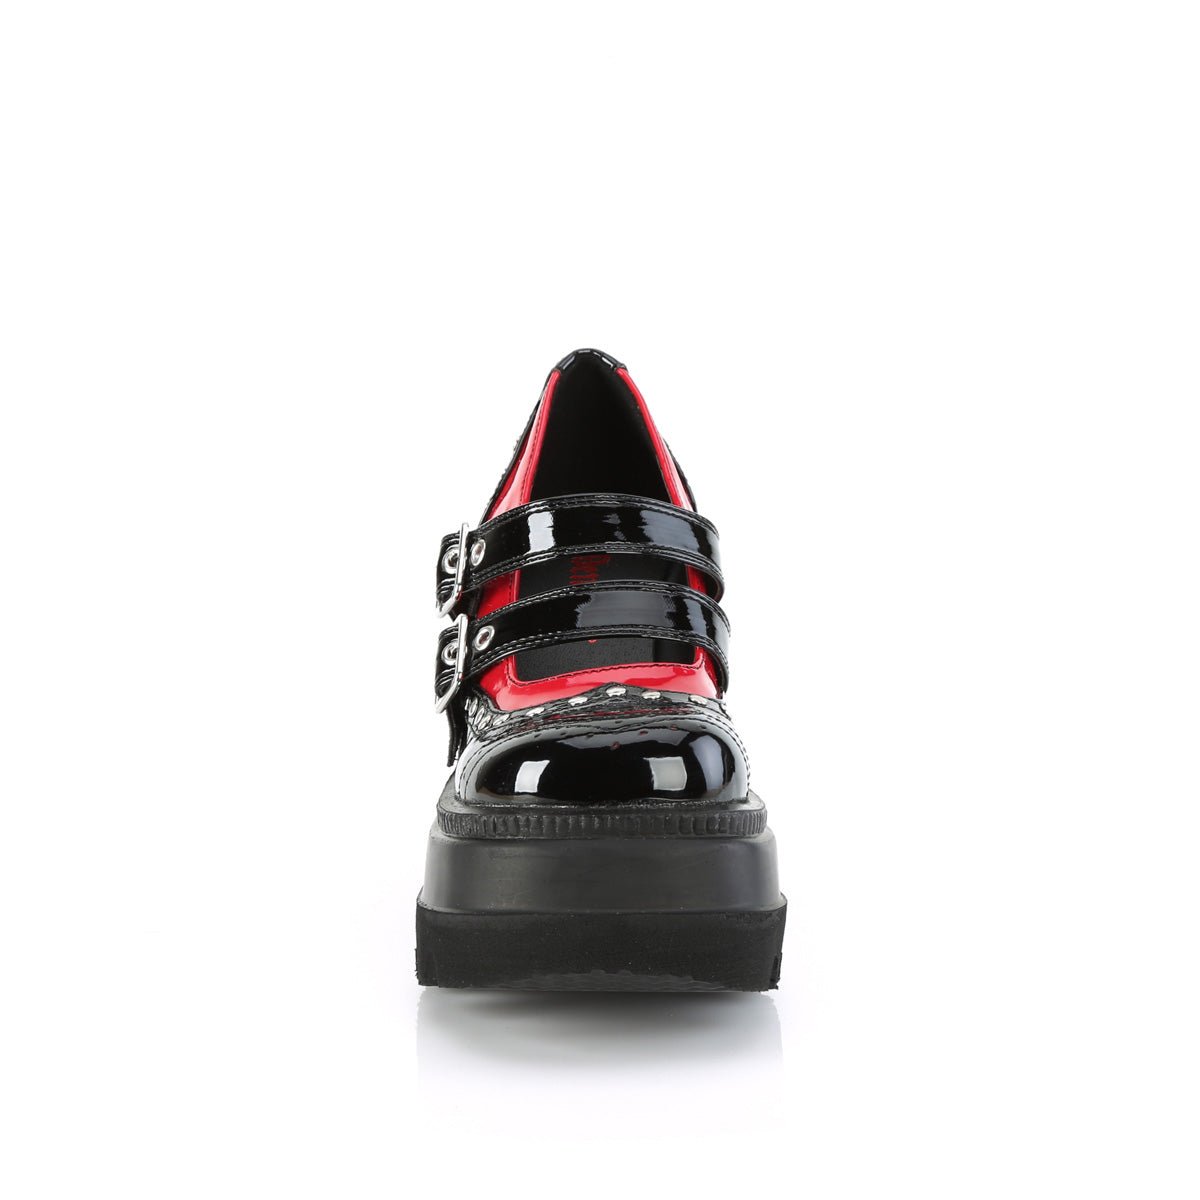 Too Fast | Demonia Shaker 27 | Black & Red Patent Leather Women's Mary Janes